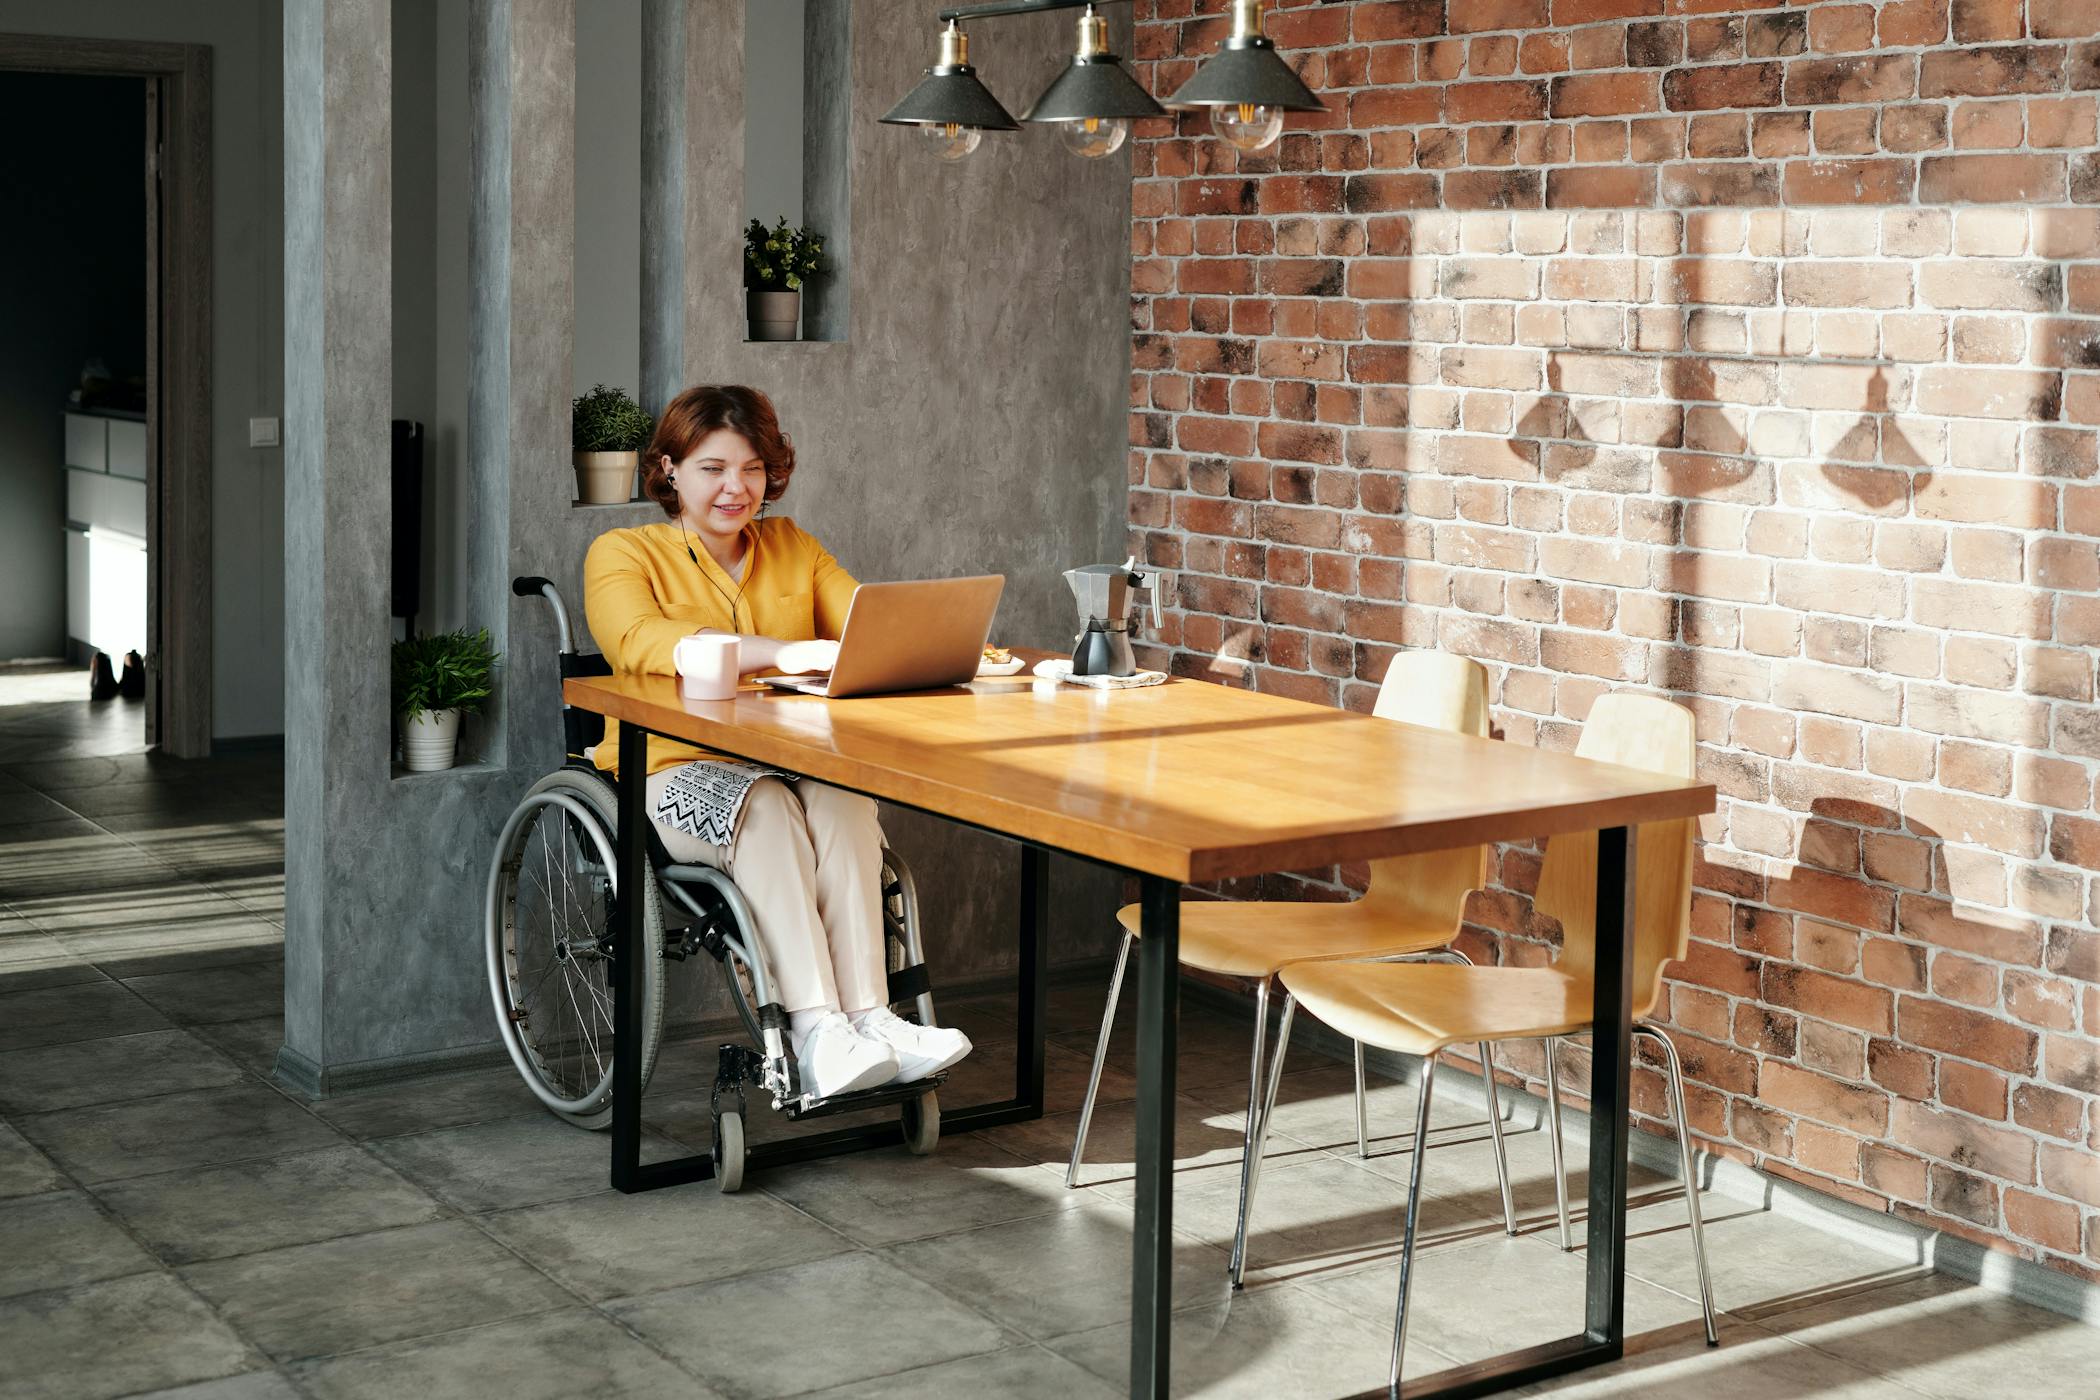 Woman in a wheelchair using a laptop